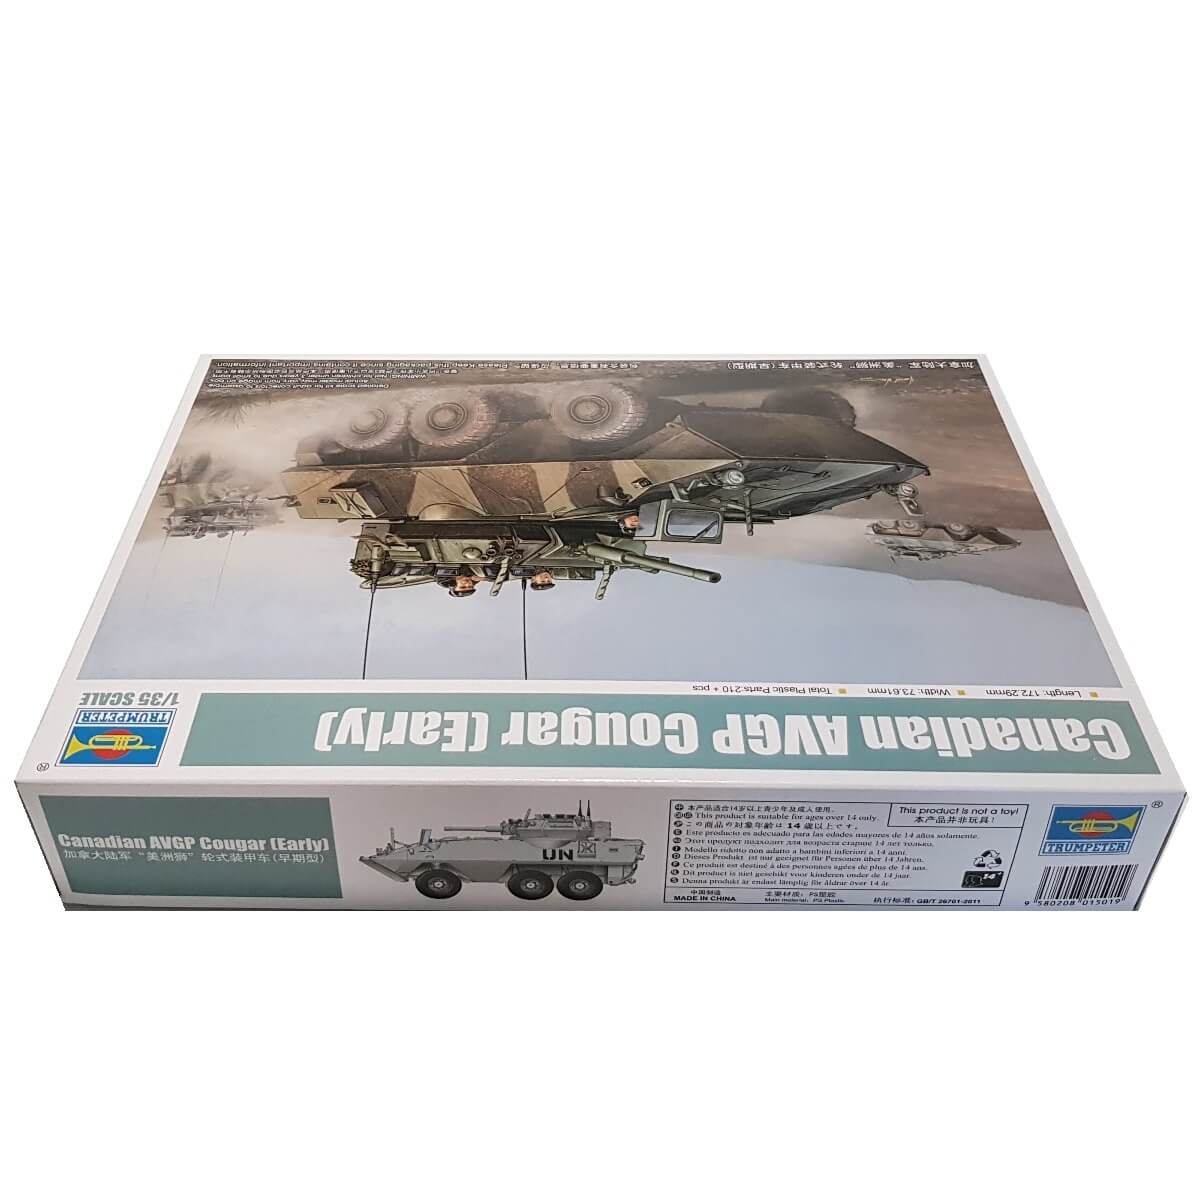 1:35 Canadian AVGP Cougar - Early - TRUMPETER